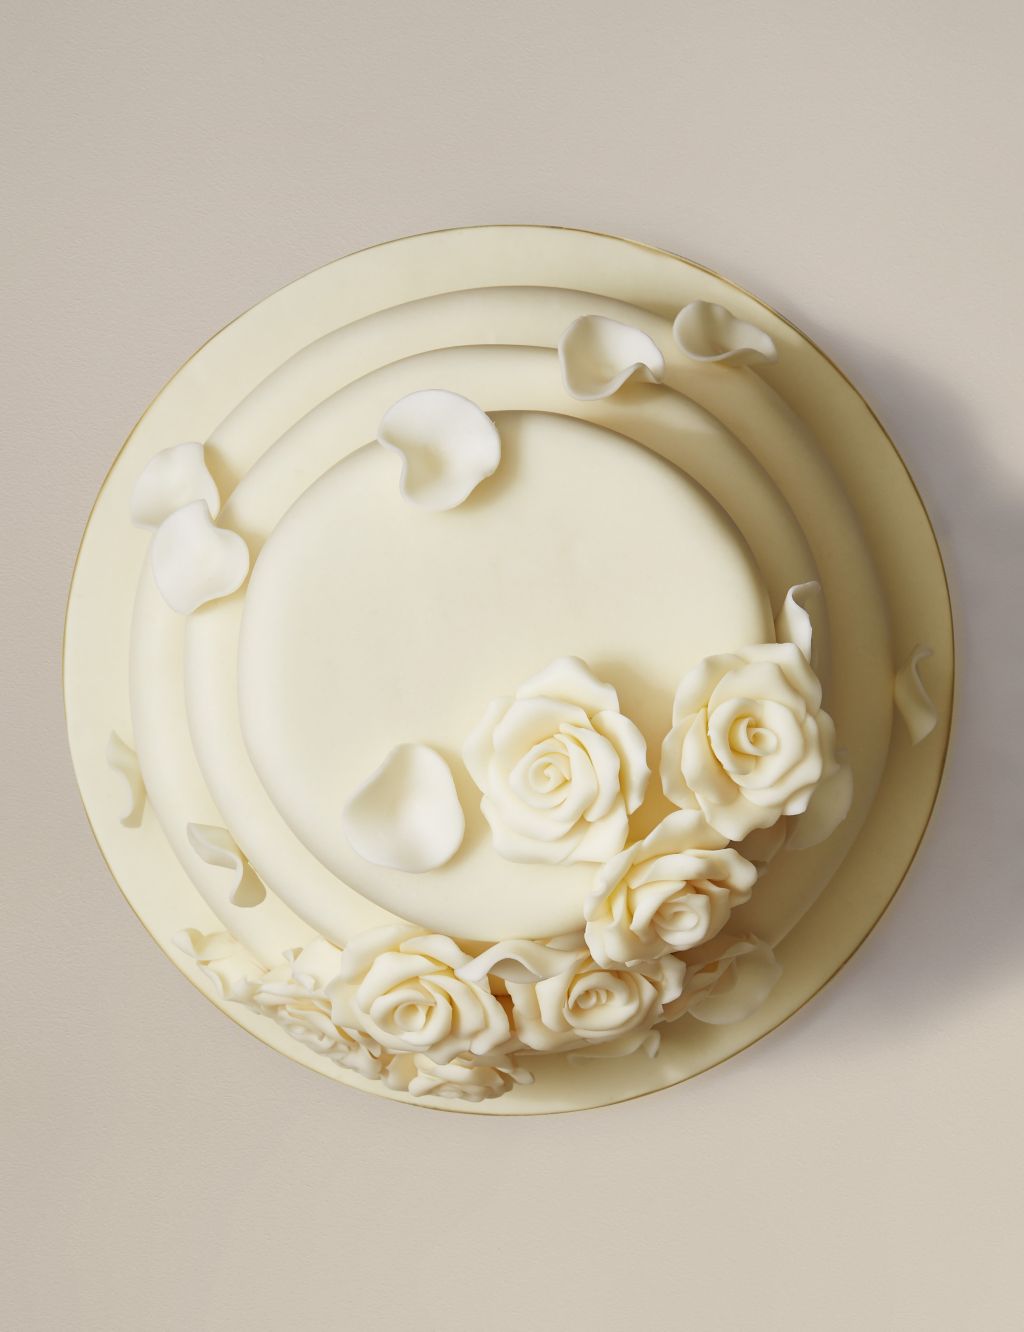 Chocolate Rose Wedding Cake with White Chocolate Icing - Chocolate Sponge (Serves 140) Last order date 26th March 2 of 2